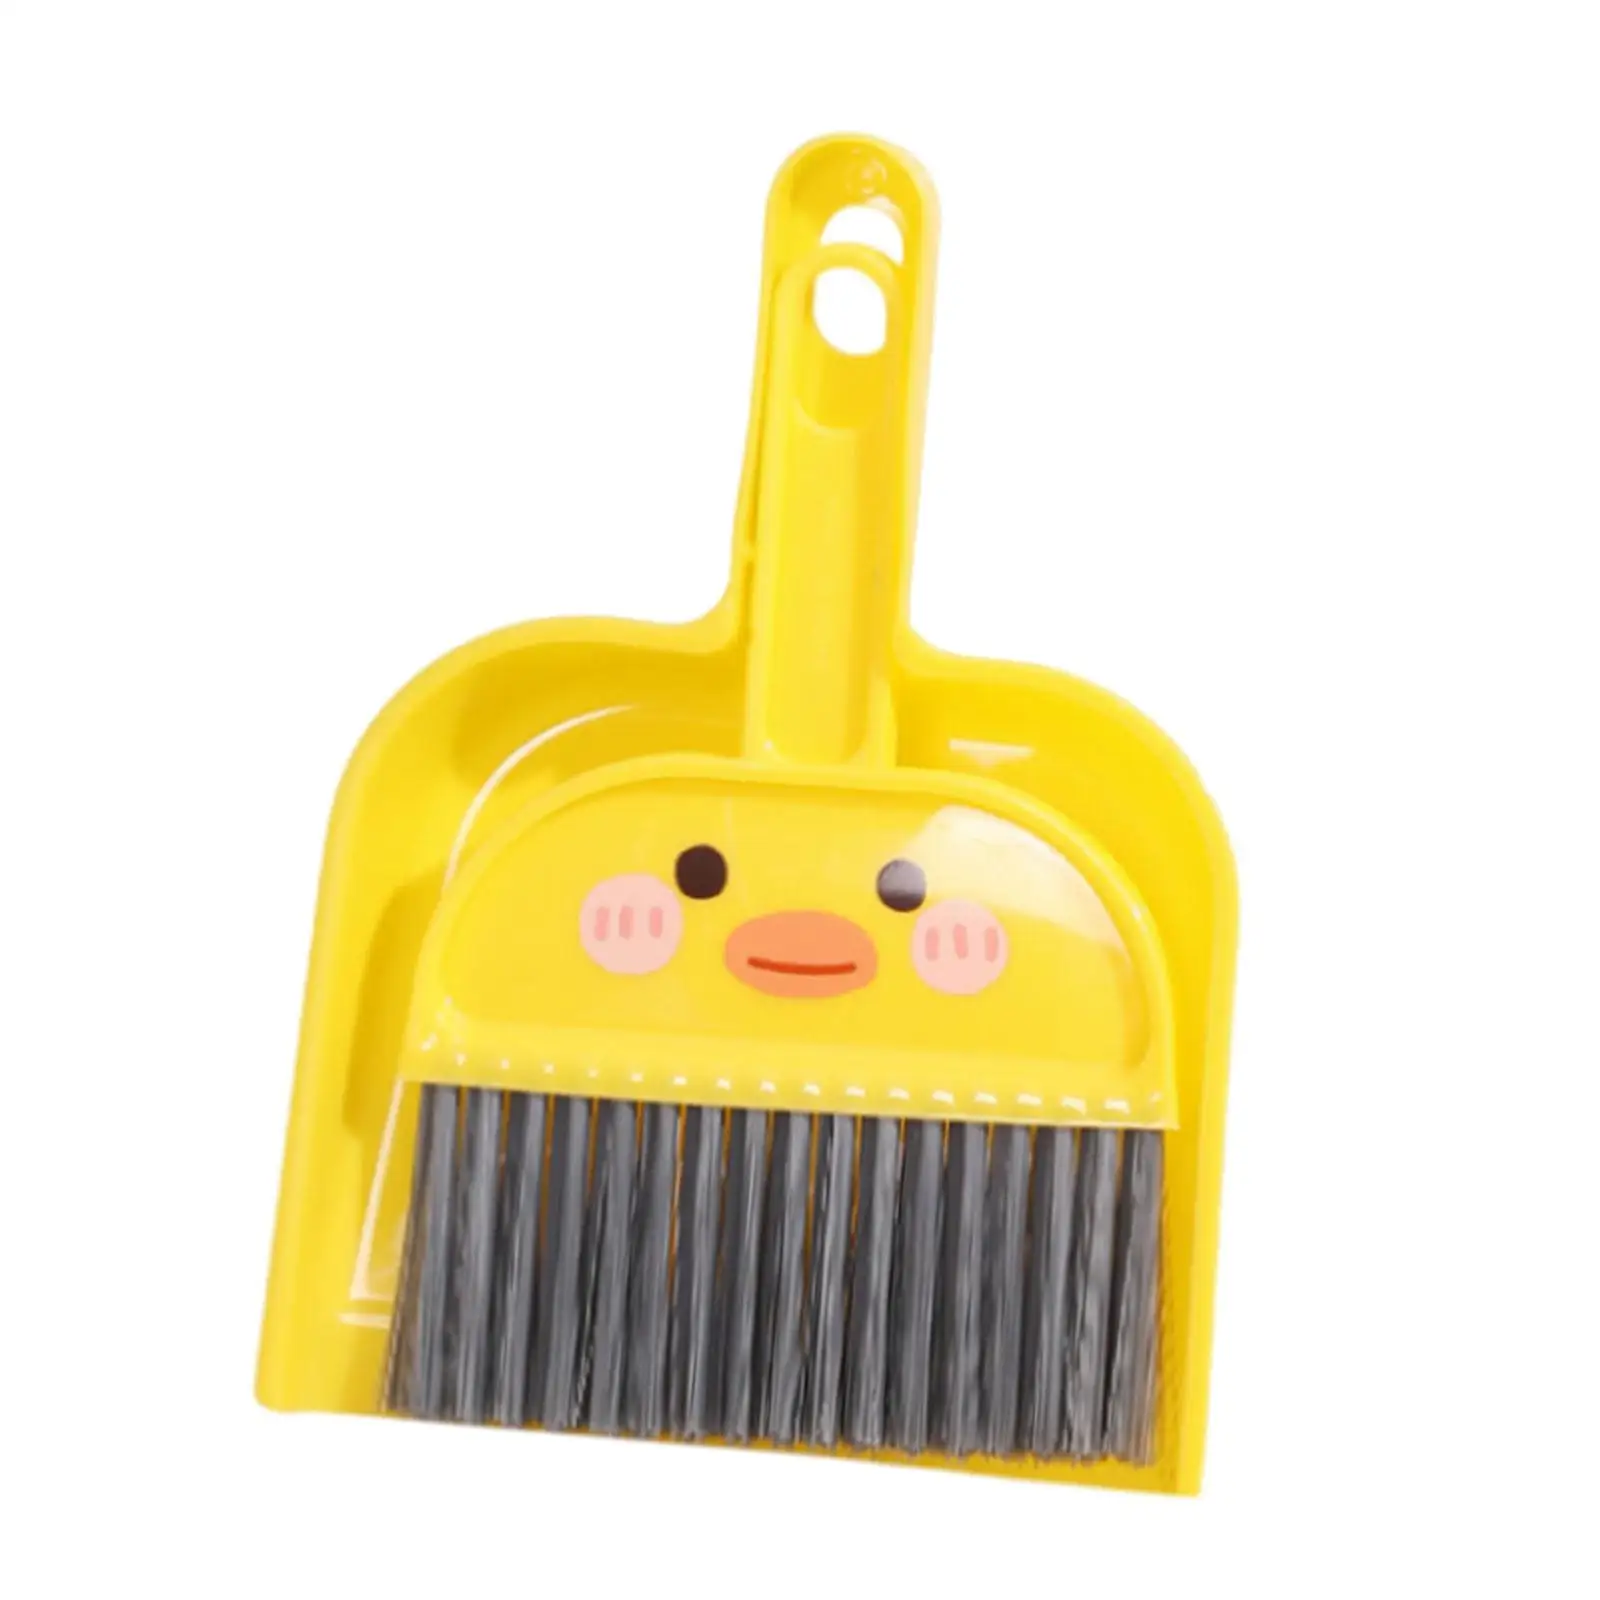 Mini Dustpan and Broom Set Kids Cleaning Set Housekeeping Hand Broom and Dust Pan for Desk Small Messes Keyboard Kitchen Table